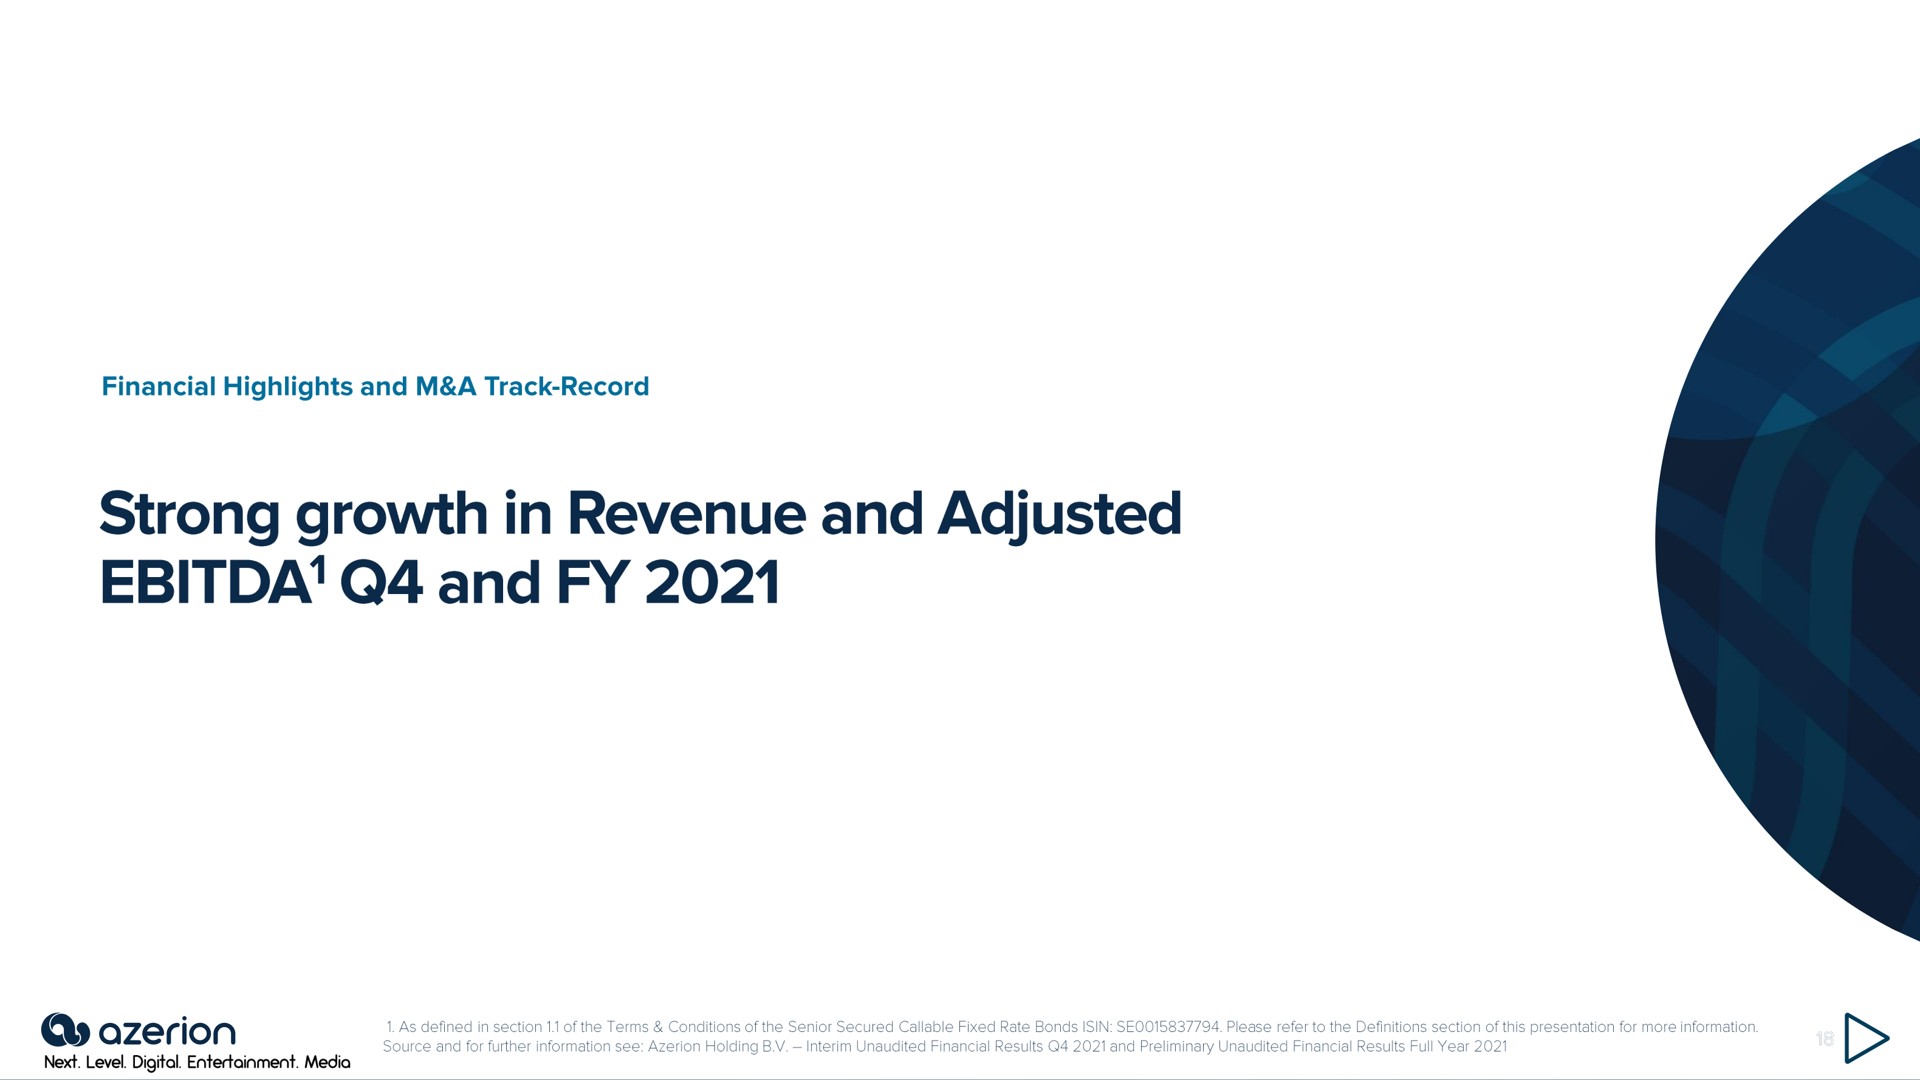 strong growth in revenue and adjusted and | Azerion